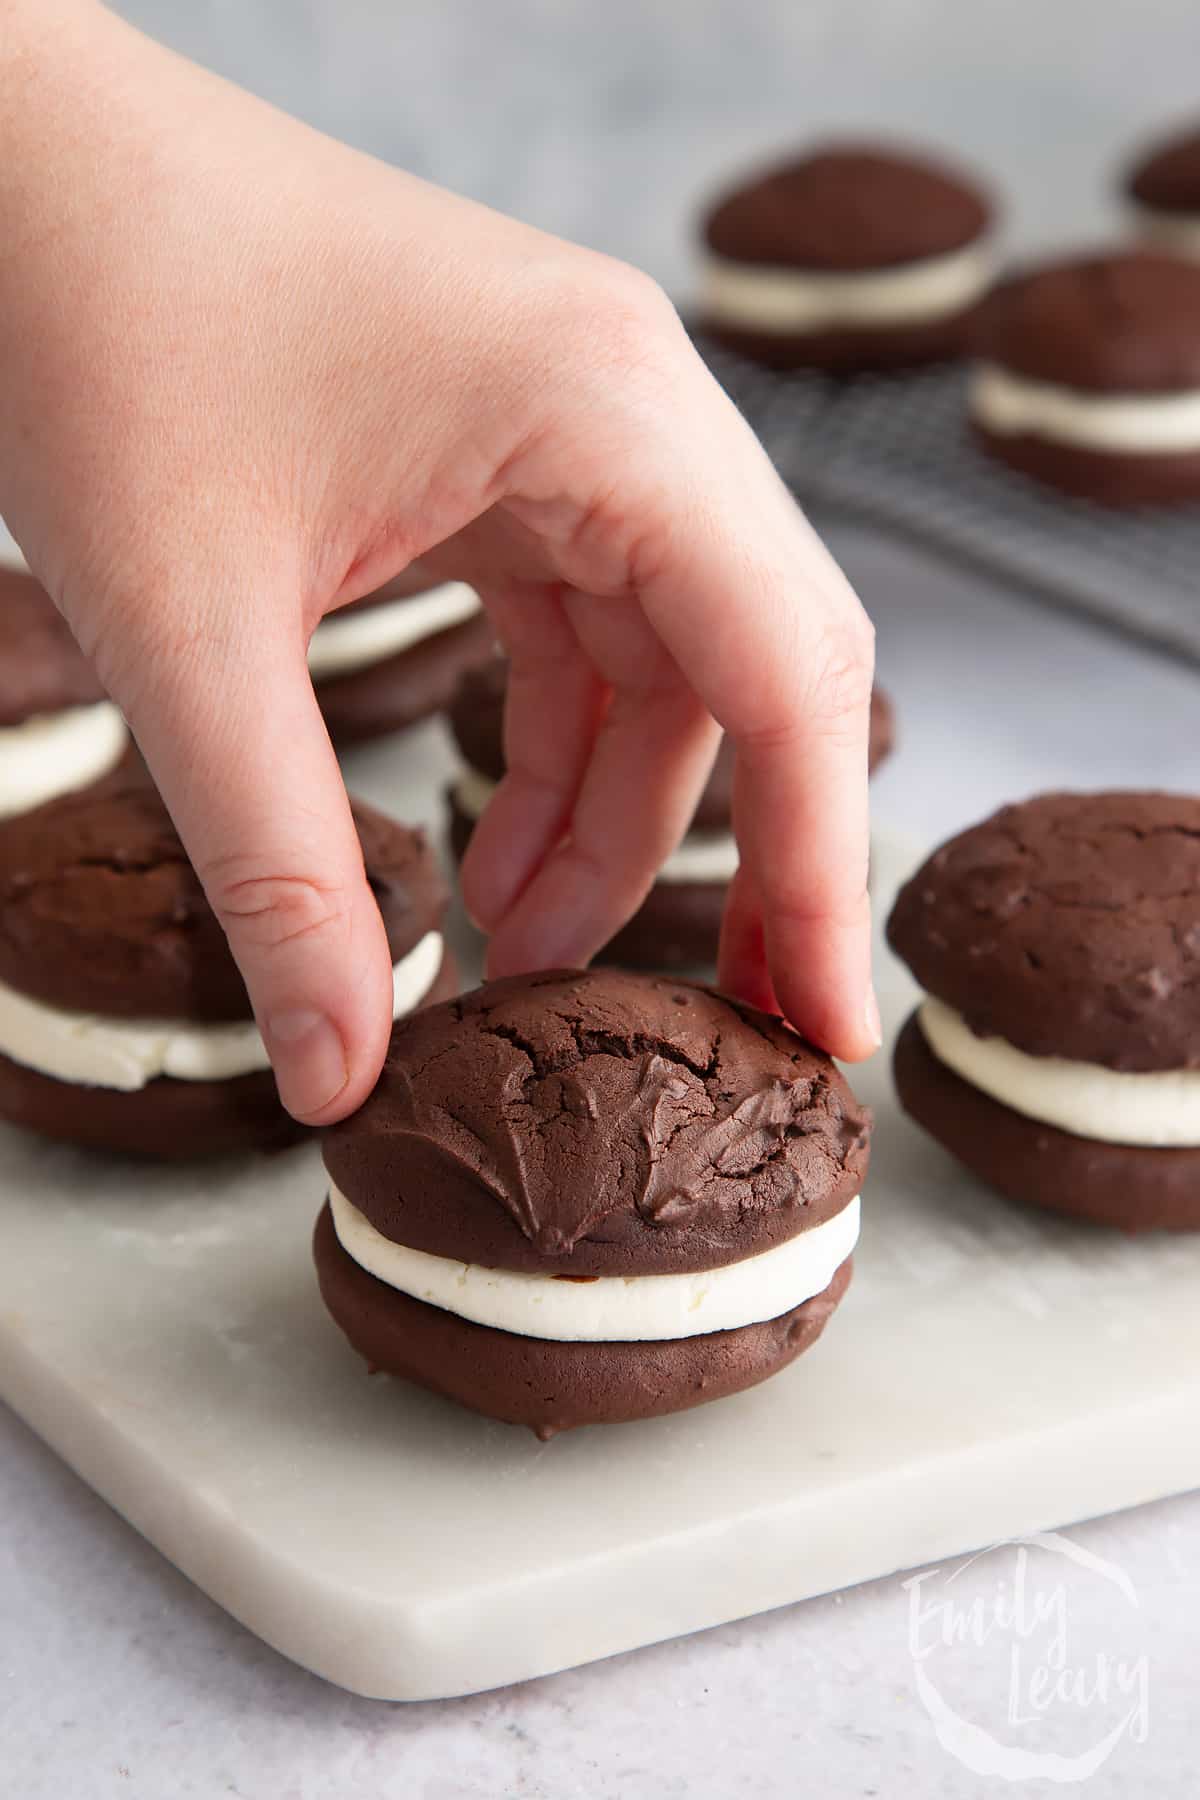 a hand picking up a Whoopie pie from a marble chopping board.